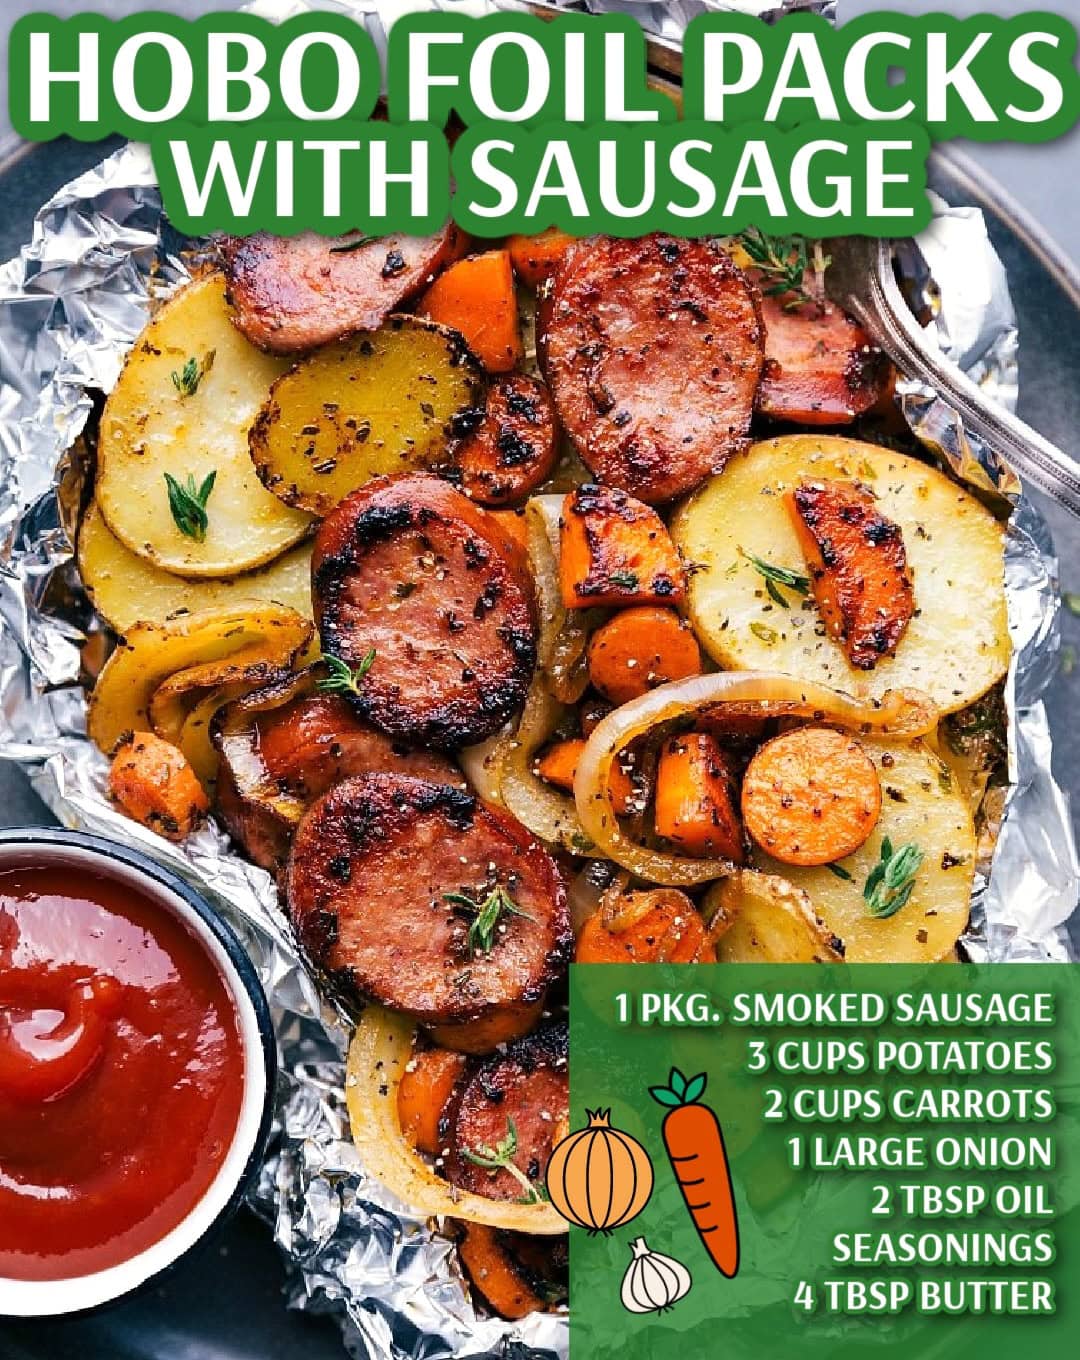 A vibrant image of an open hobo foil packet with sliced smoked sausage, potatoes, and carrots, seasoned and cooked in foil. Ingredients and recipe steps are noted on the image. A side of ketchup is